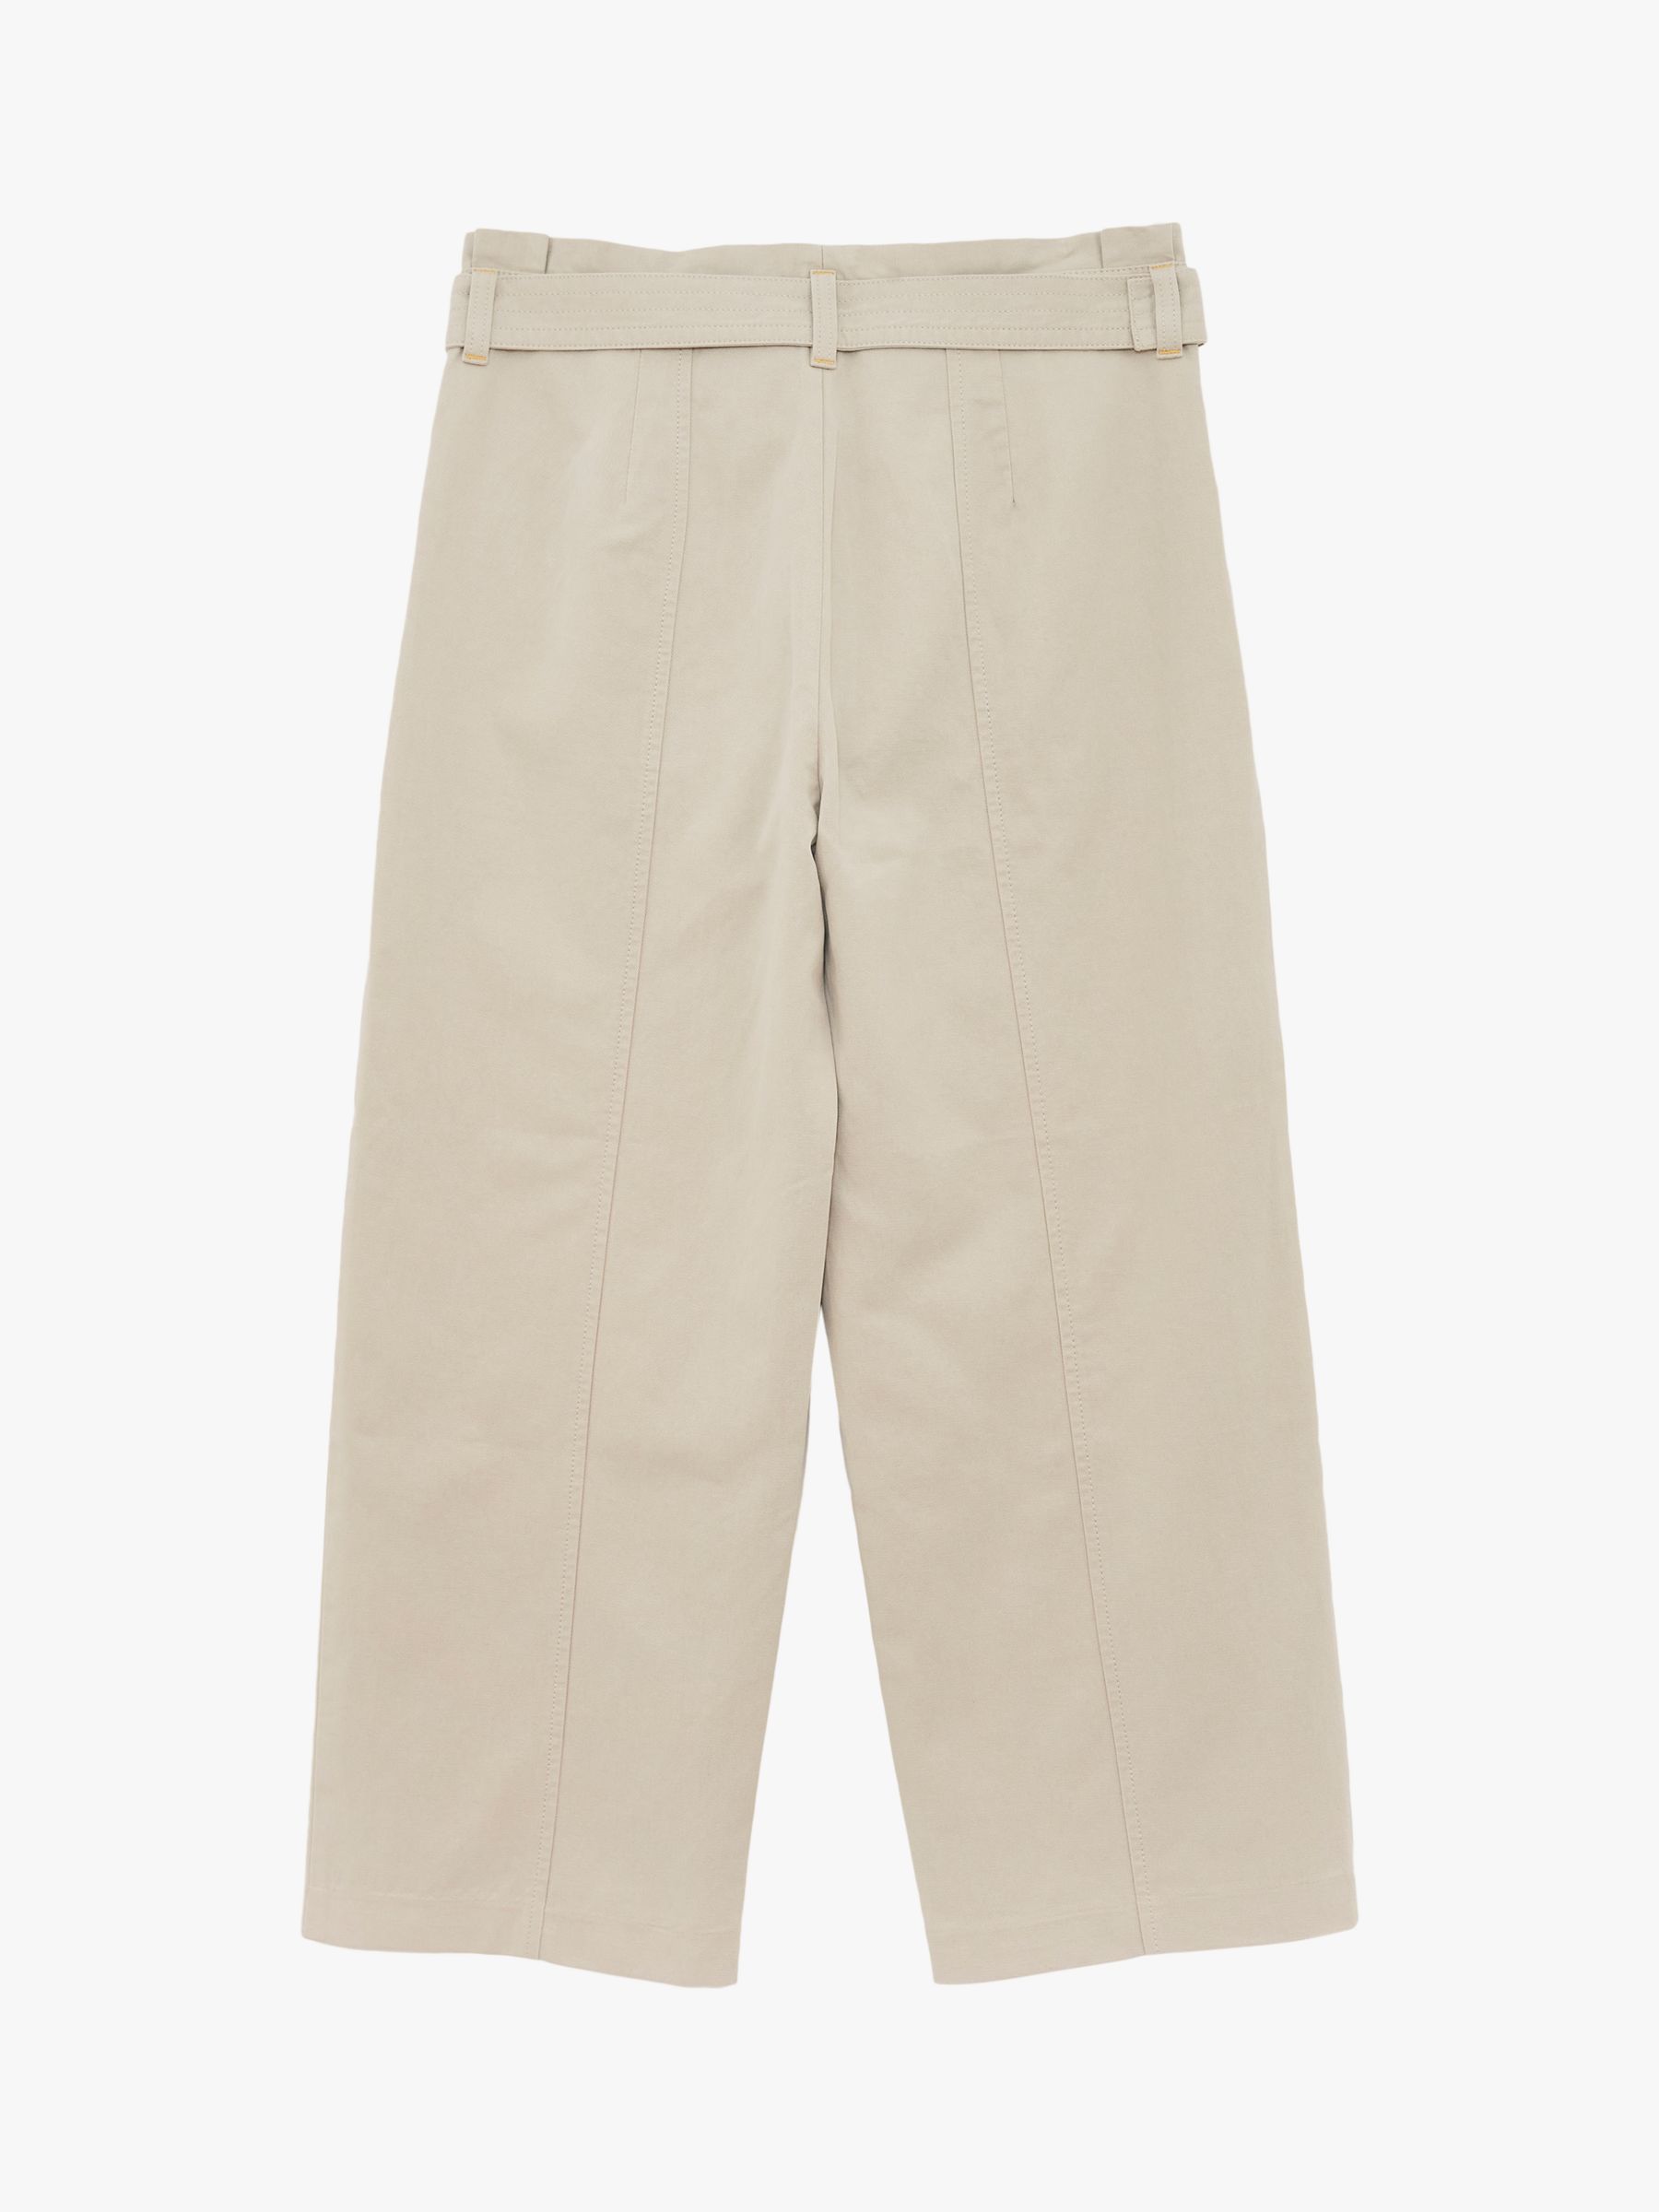 White Stuff Teakie Cropped Trousers